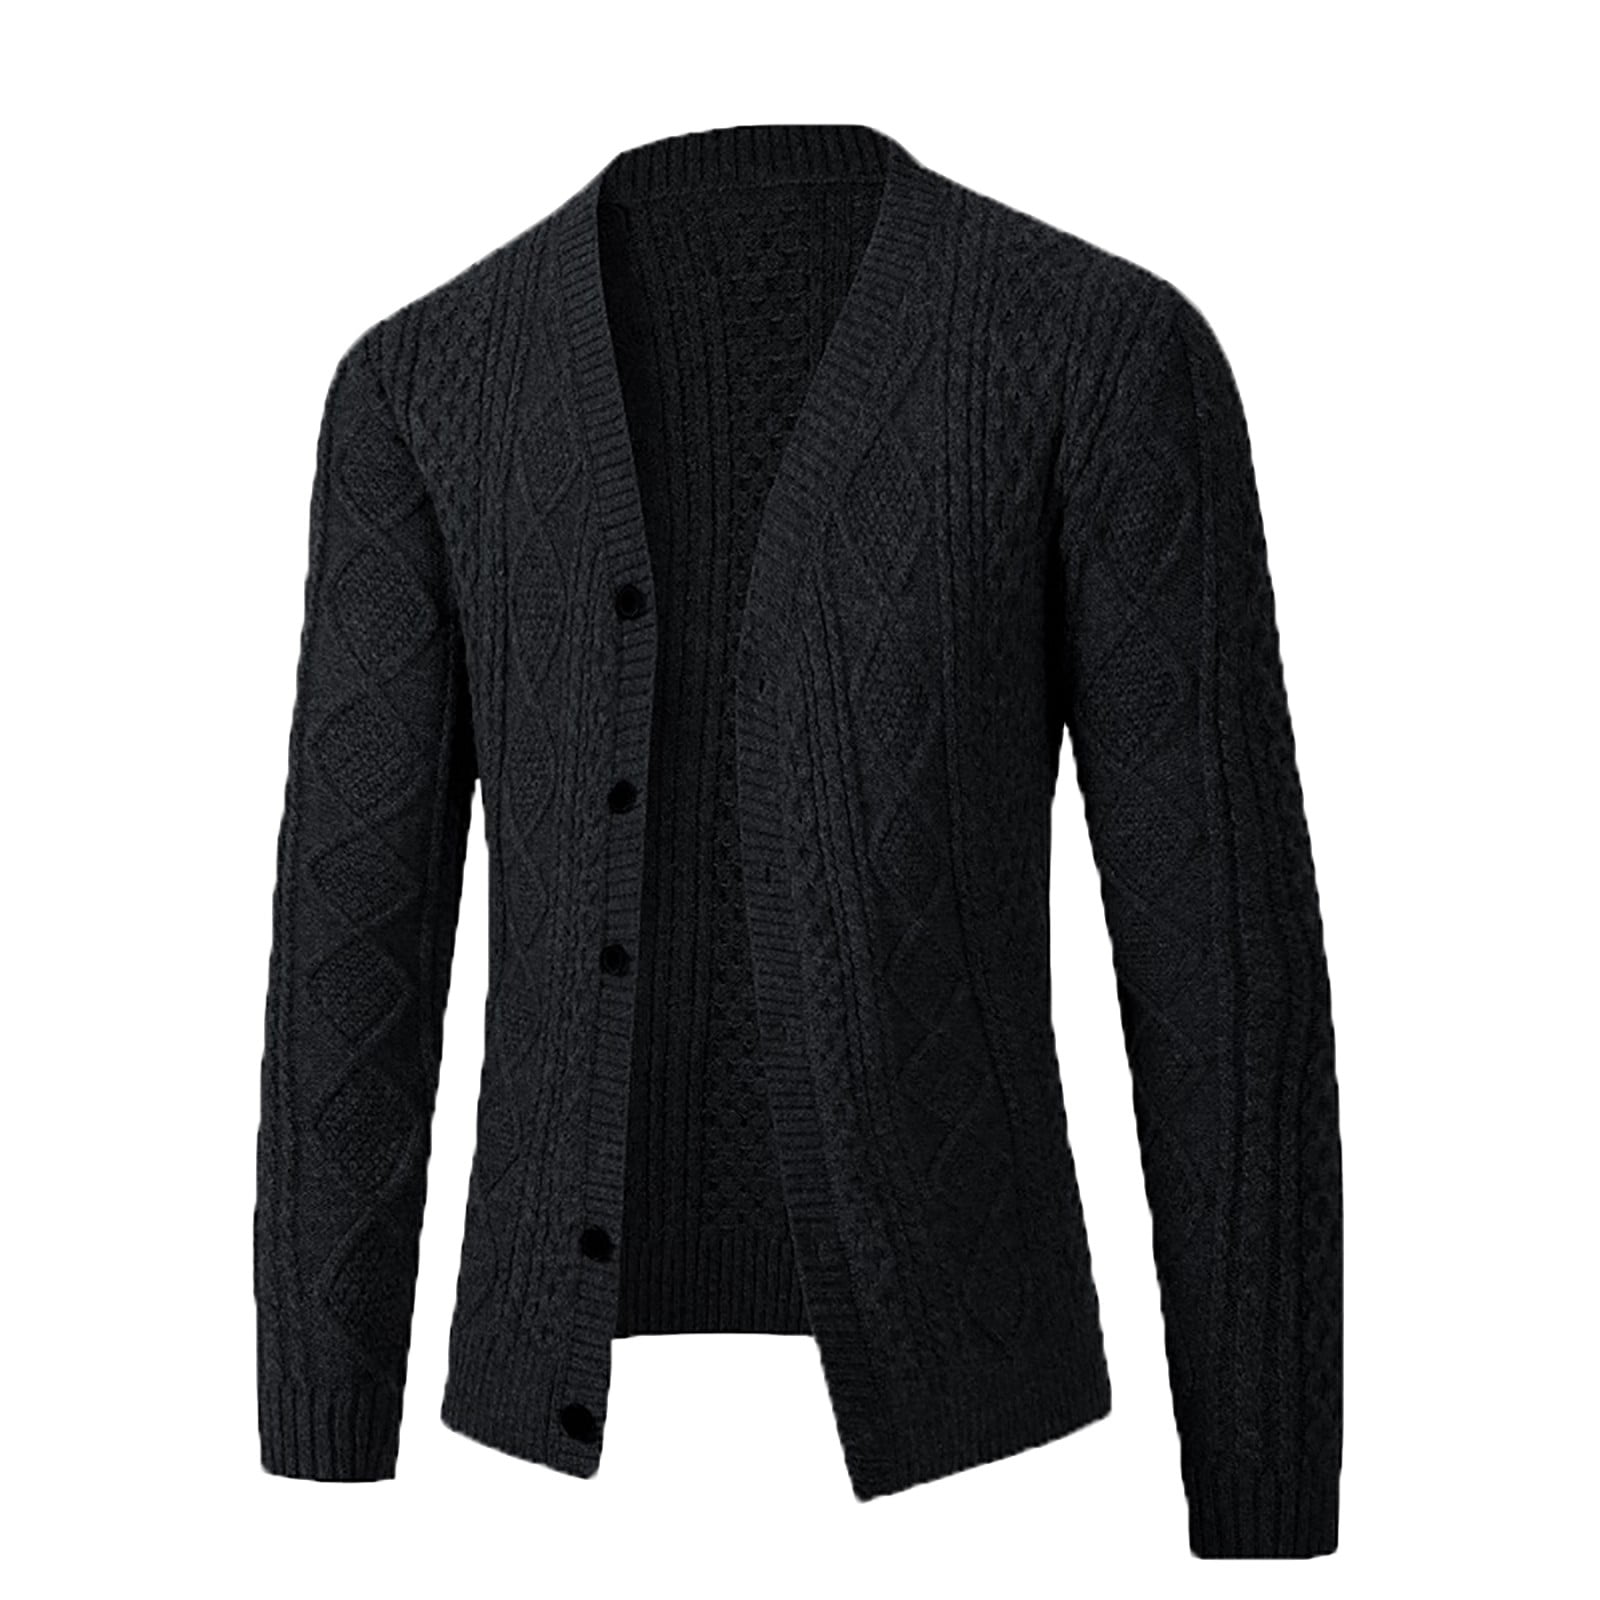 Sngxgn Men's Ruffle Shawl Collar Slim Fit Cable Knit Button up Men's ...